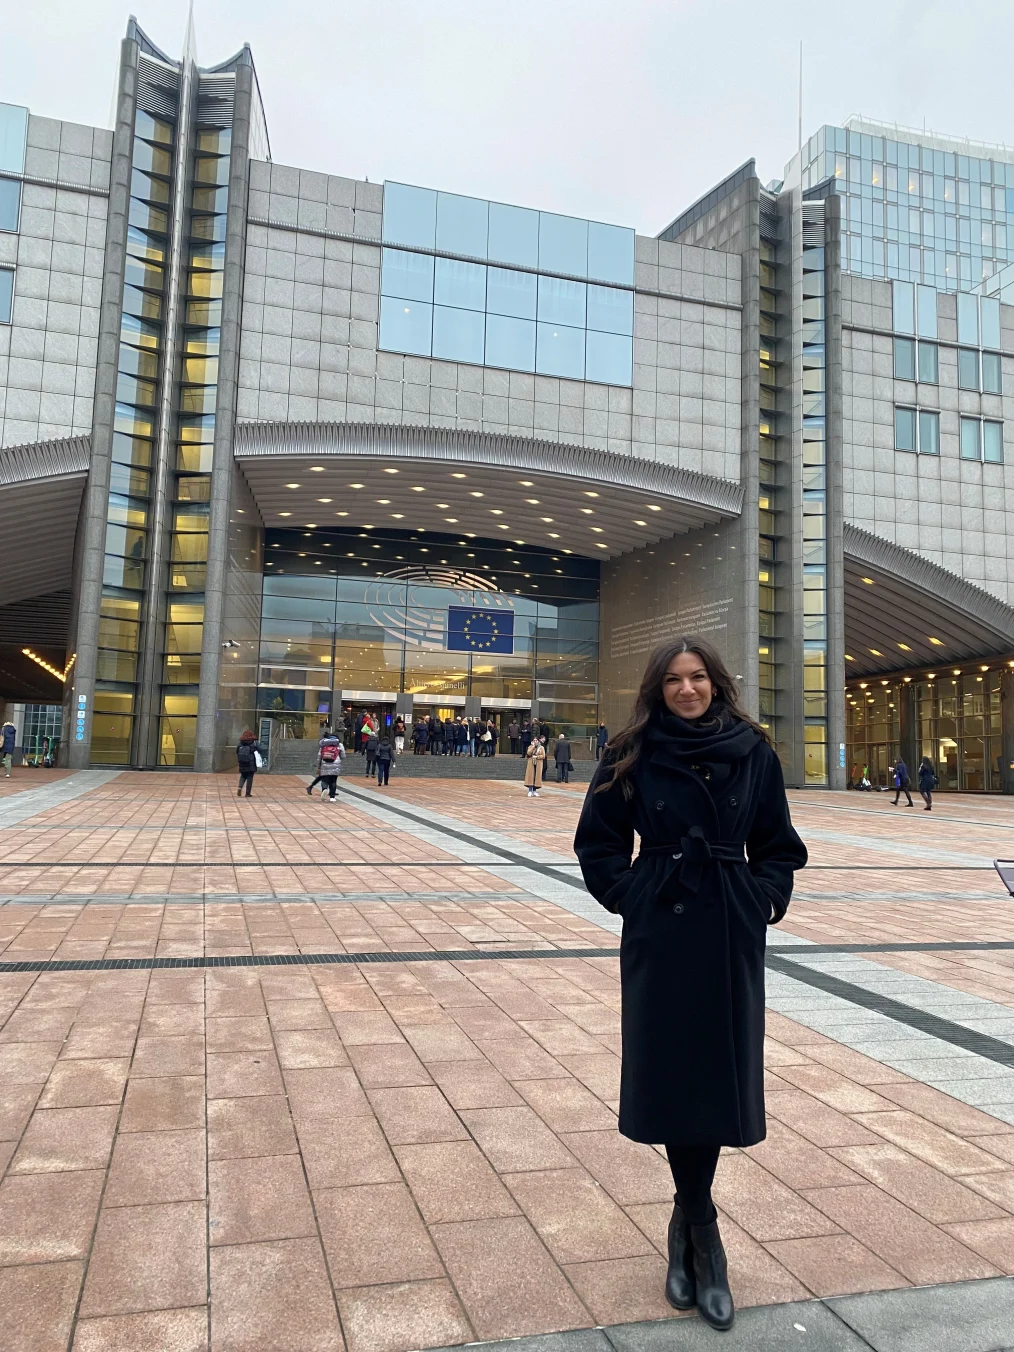 Ornella Cosomati, holds a closed lip smile as she stands outside the European Parliament building. In the background, people are walking in. There is a flag of Europe in the center of the building.